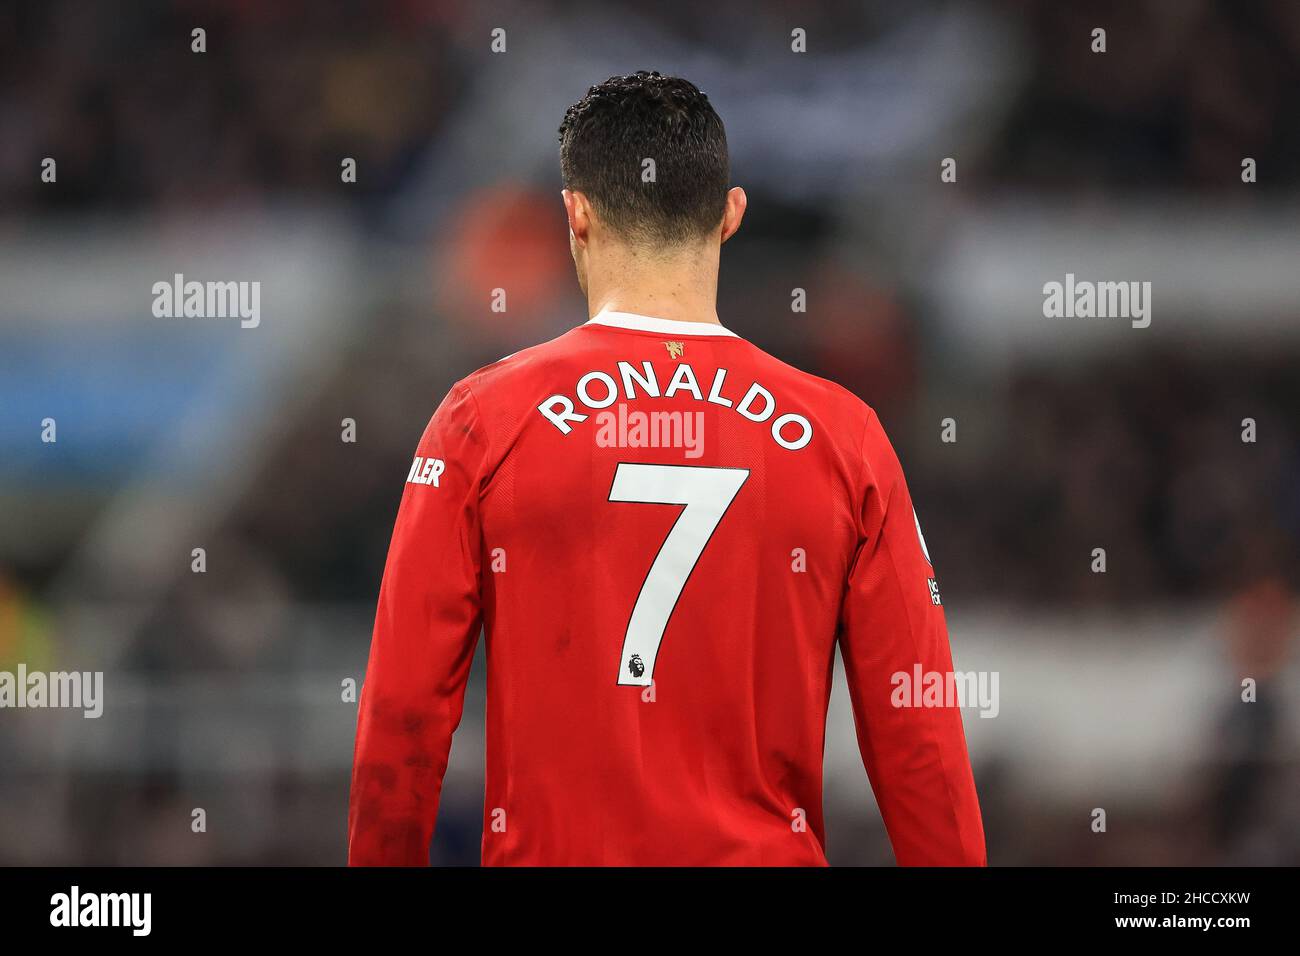 Cristiano Ronaldo #7 of Manchester United back of shirt during the game in, on 12/27/2021. (Photo by Mark Cosgrove/News Images/Sipa USA) Credit: Sipa USA/Alamy Live News Stock Photo